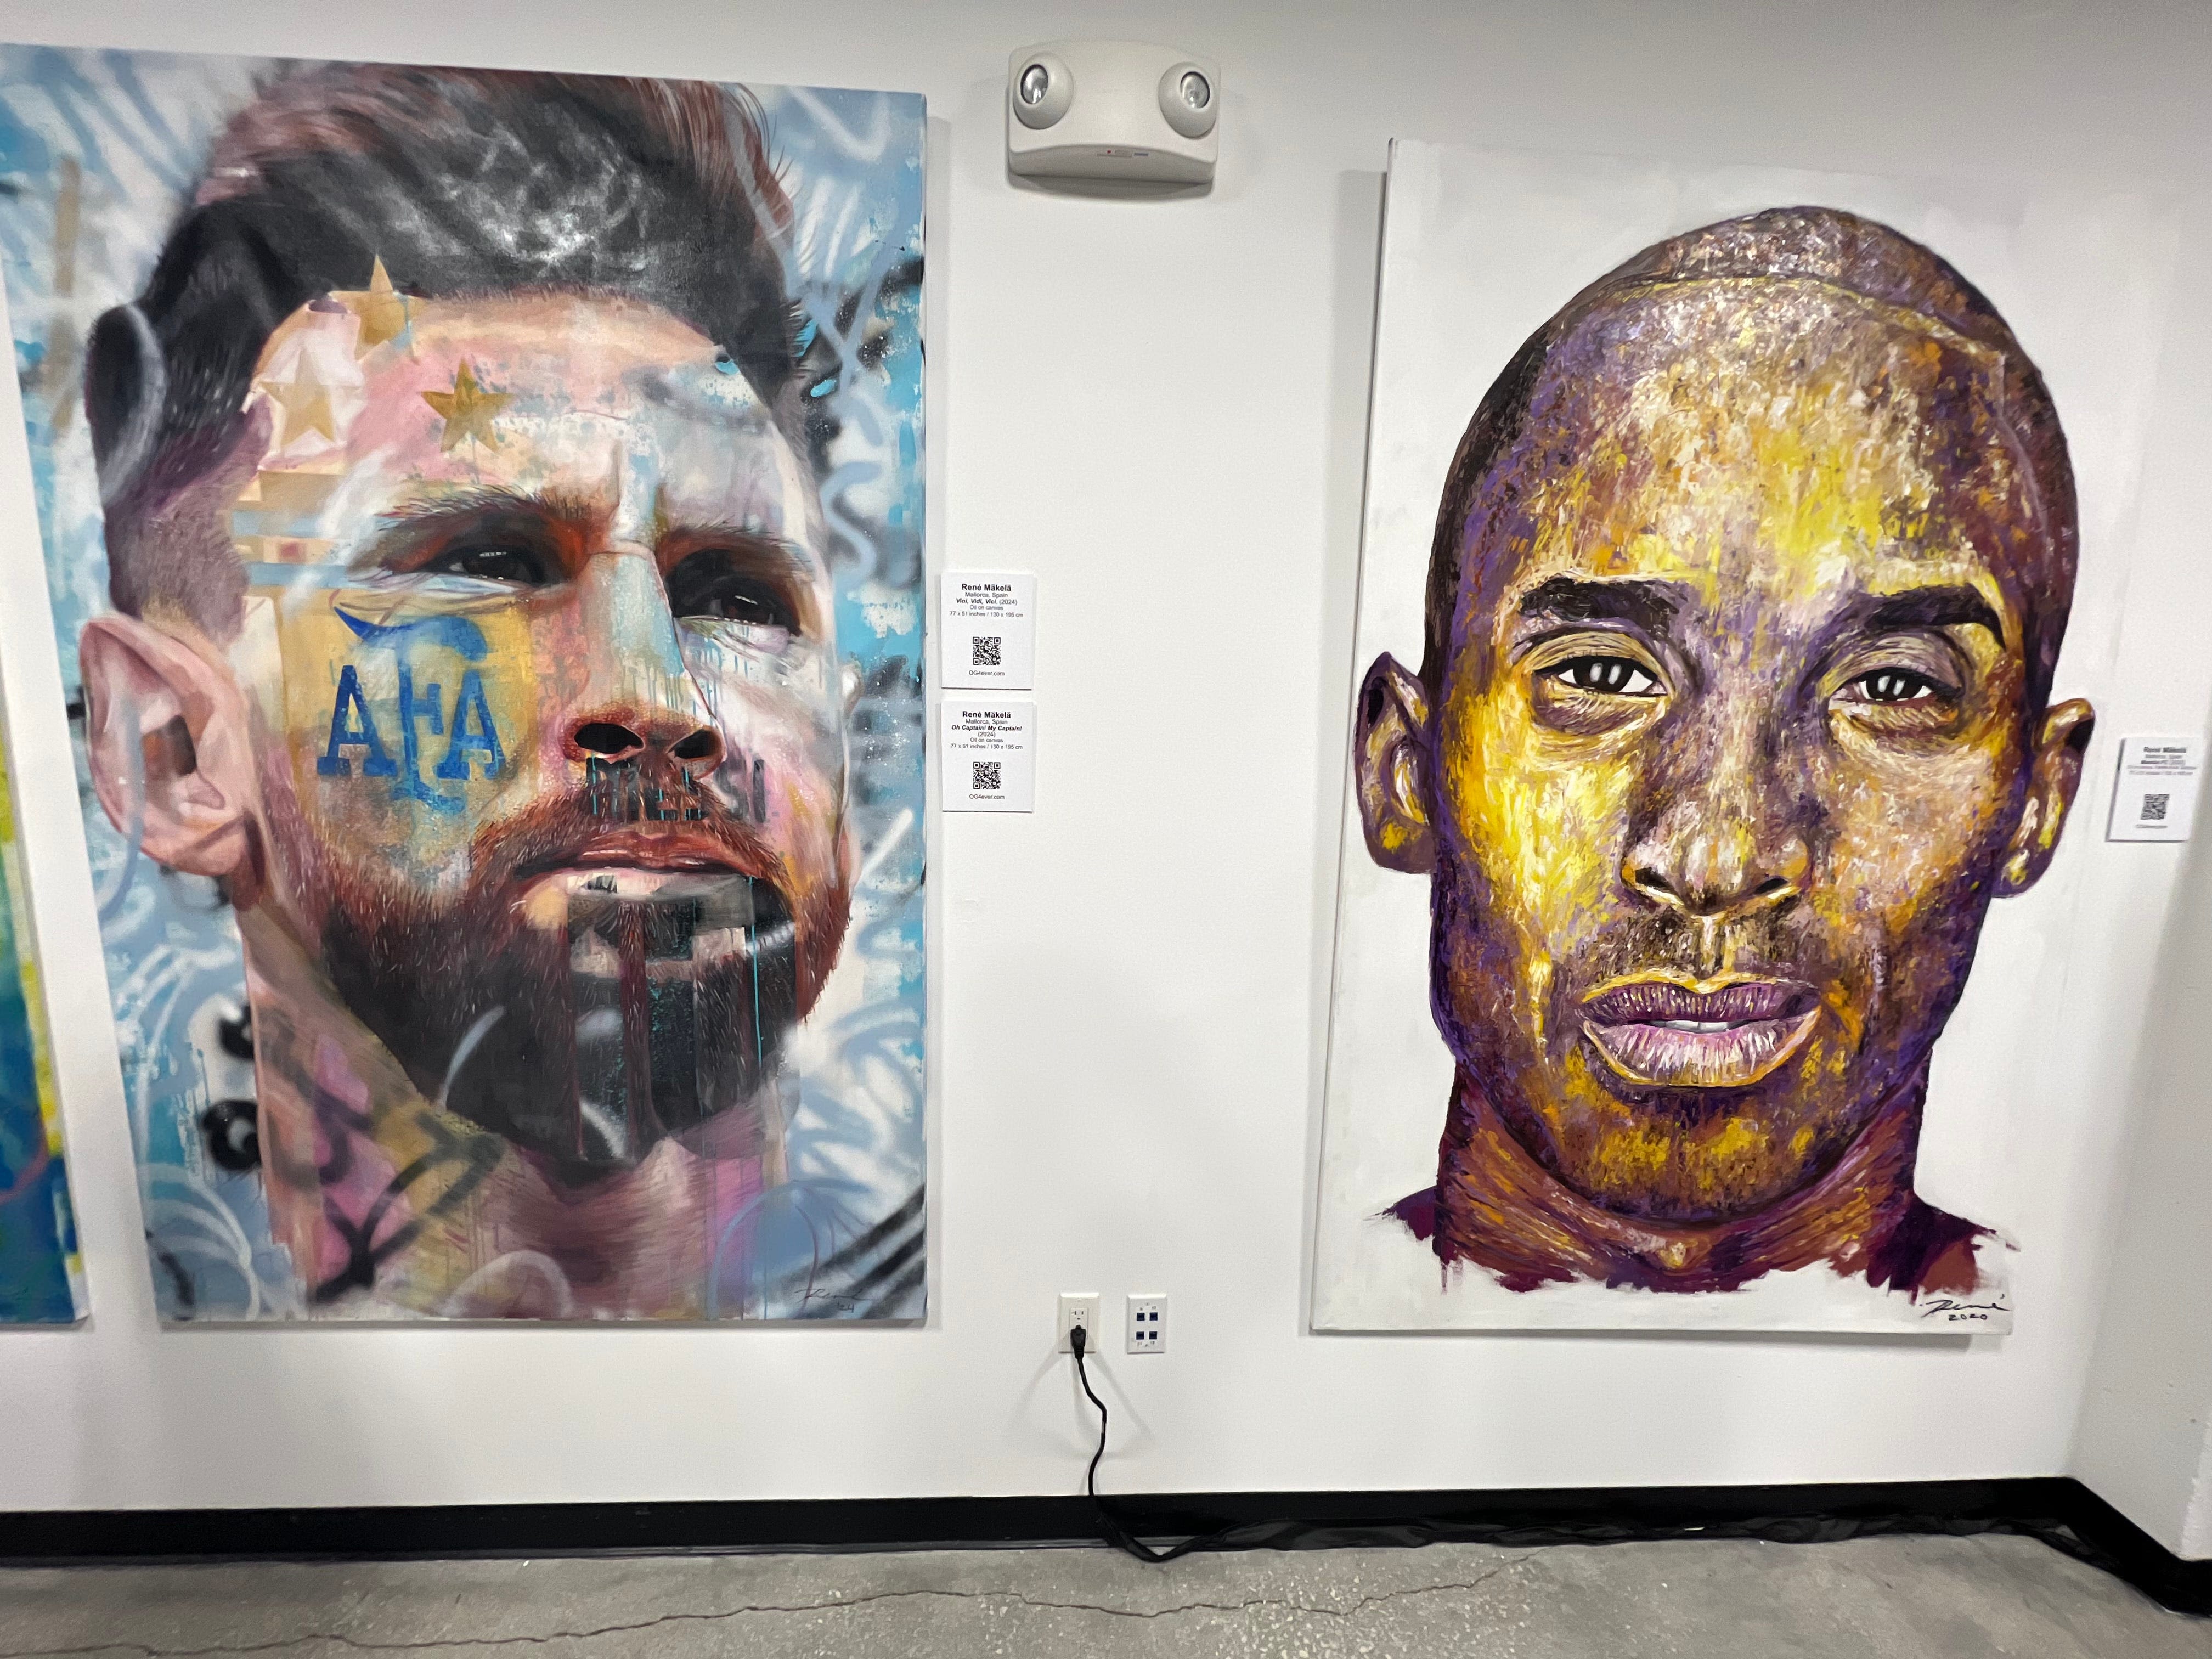 Why gallery in Miami's Wynwood district merged soccer and art as culture